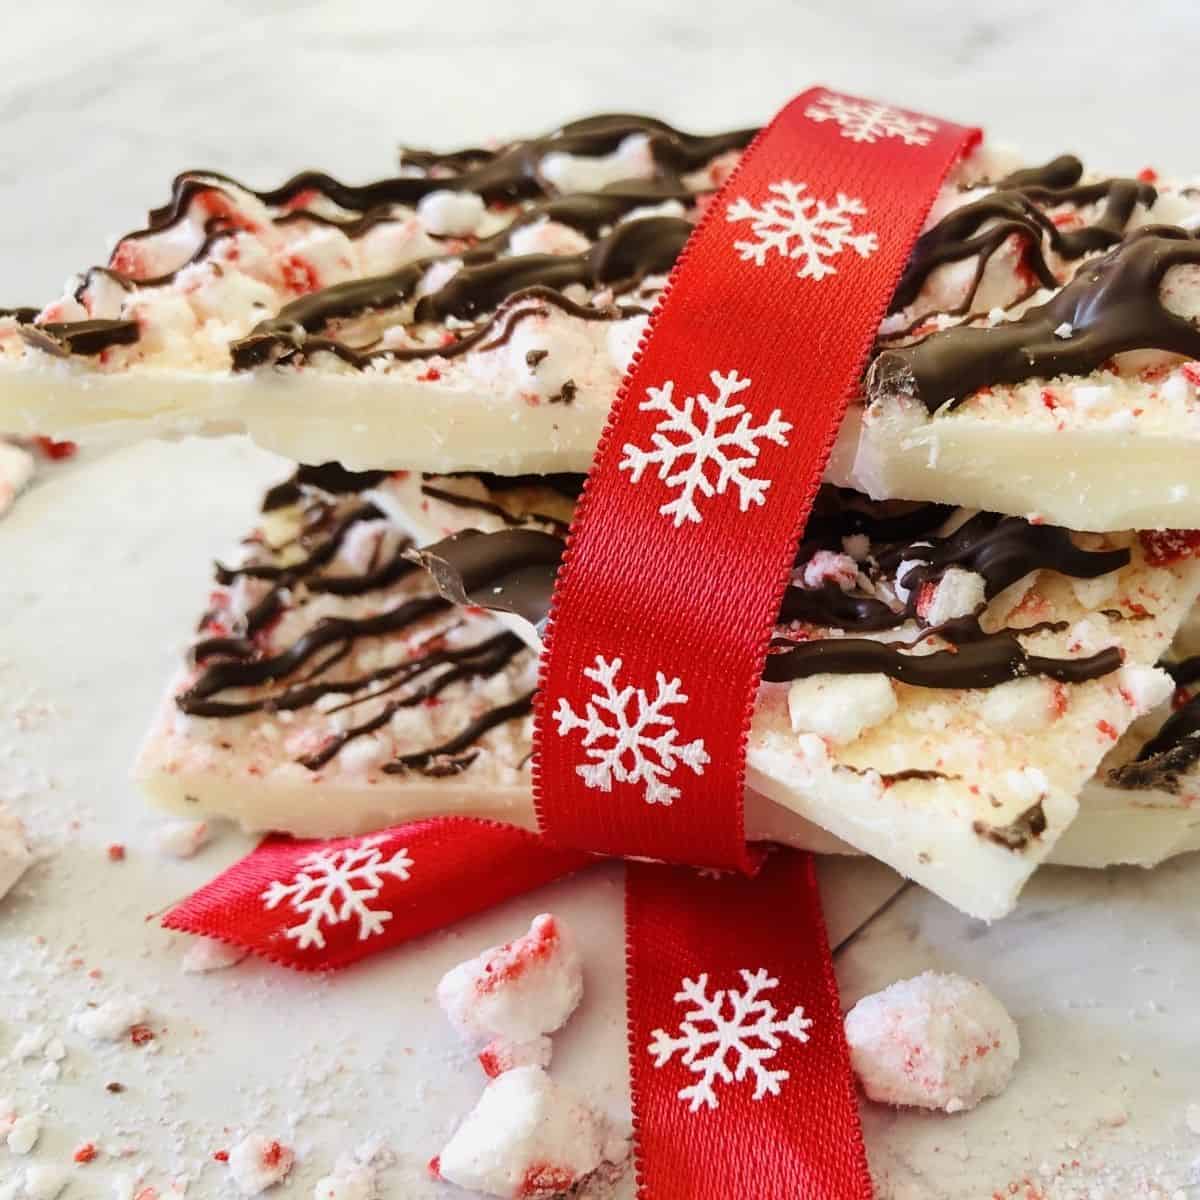 A few pieces of white chocolate peppermint bark wrapped in red ribbon with snow flakes on it.